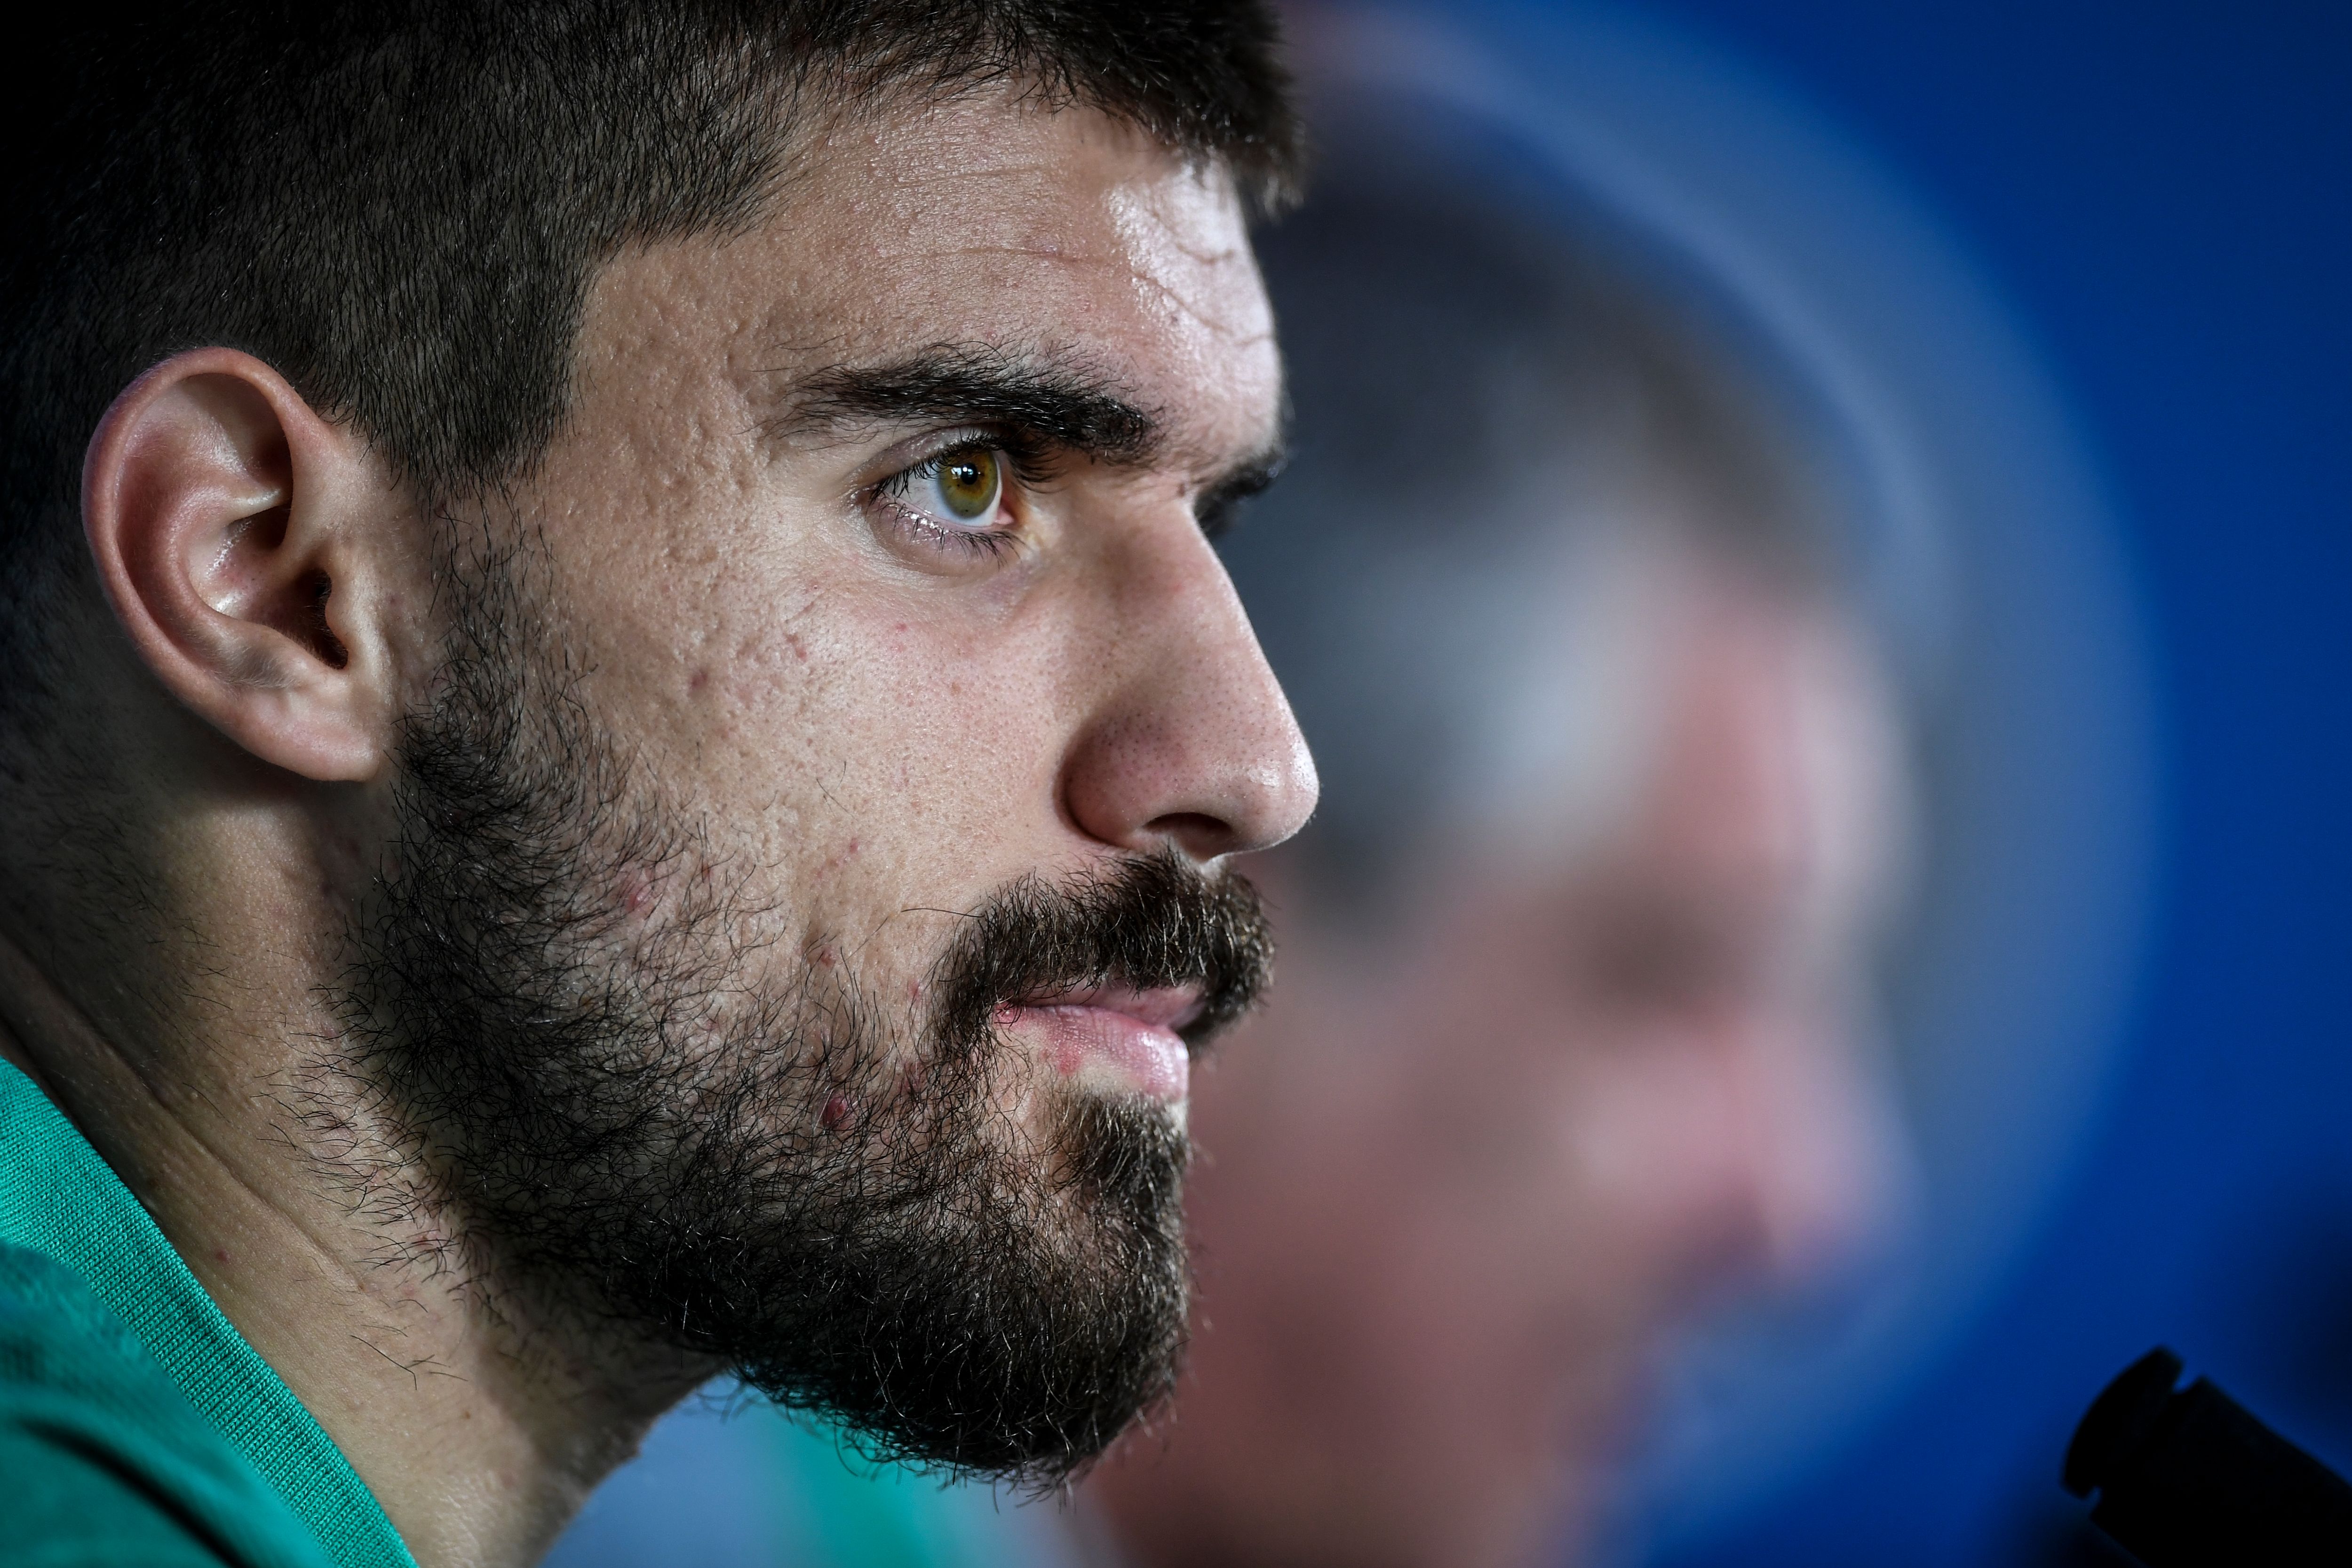 Portugal's midfielder Ruben Neves gives a press conference at Algarve stadium in Faro on November 13, 2019, on the eve of UEFA Euro 2020 Qualifiers match, Group B, between Portugal and Lithuania. (Photo by PATRICIA DE MELO MOREIRA / AFP) (Photo by PATRICIA DE MELO MOREIRA/AFP via Getty Images)